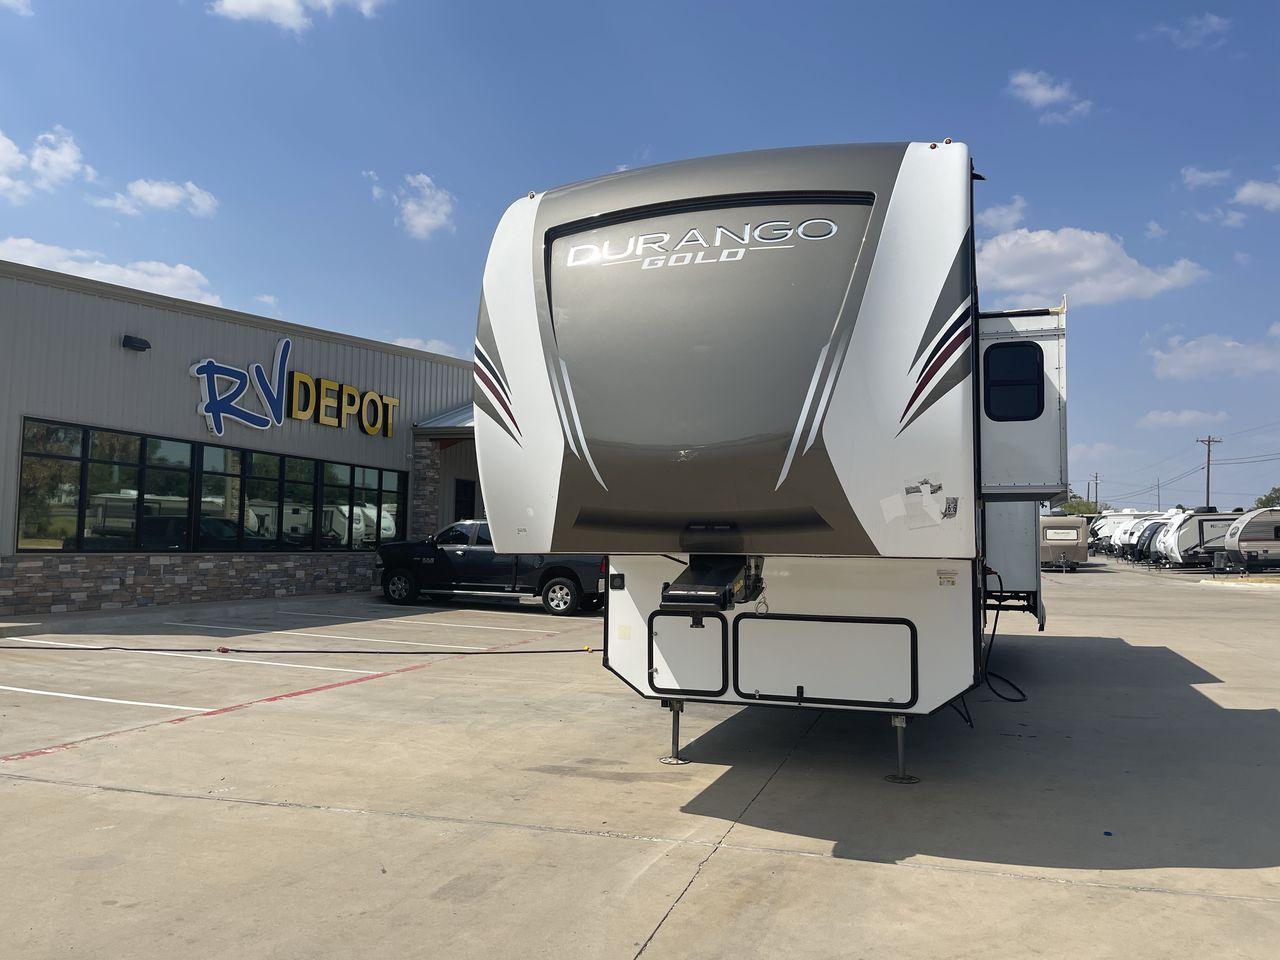 2020 K-Z DURANGO GOLD 366FBT (4EZFV4026L6) , Length: 39.83 ft. | Dry Weight: 11,470 lbs. | Gross Weight: 14,500 lbs. | Slides: 3 transmission, located at 4319 N Main St, Cleburne, TX, 76033, (817) 678-5133, 32.385960, -97.391212 - Travel and enjoy the luxuries this 2020 K-Z Durango Gold 366FBT has to offer! This fifth wheel measures almost 40 feet long and 13.5 feet tall. It has a dry weight of 11,470 pounds as well as a GVWR of 14,500 pounds. It comes equipped with three power slides and an 18-foot power awning. This unit is - Photo #3